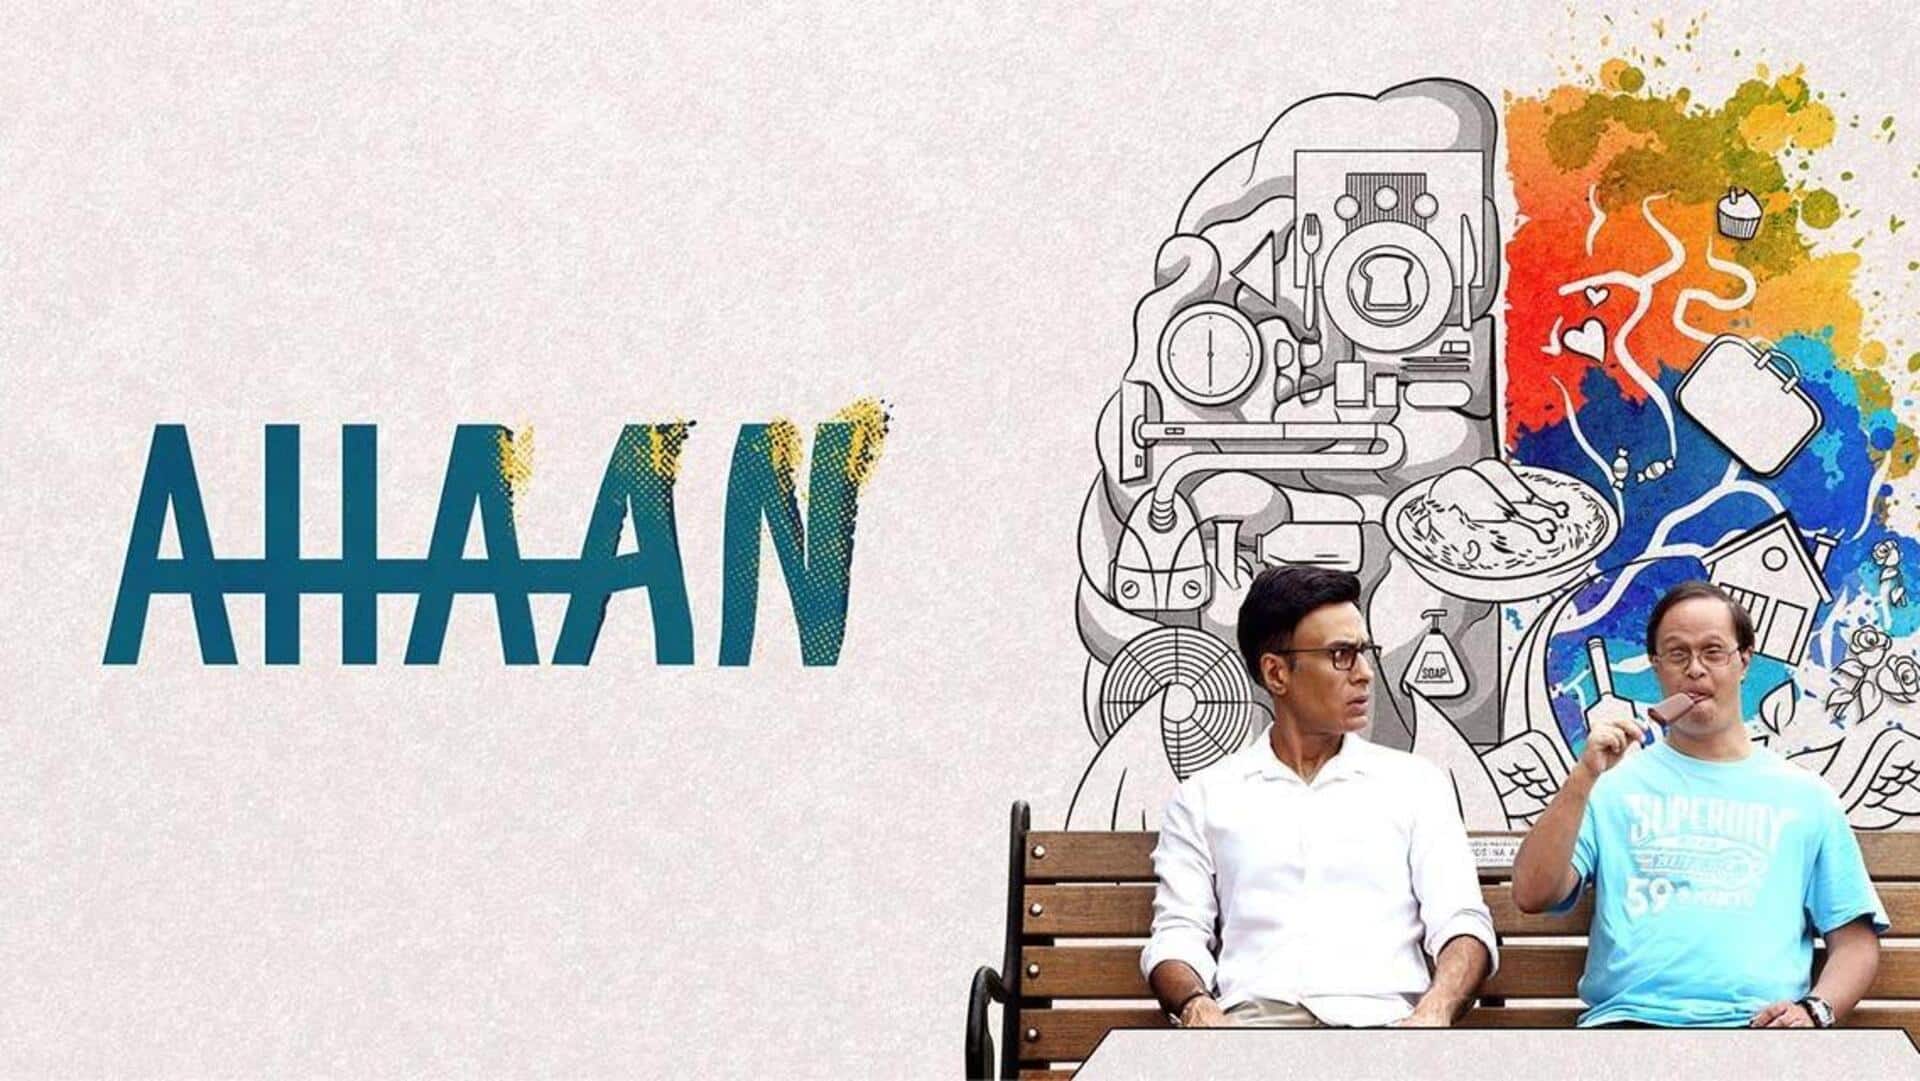 NewsBytes Recommends: 'Ahaan' on Netflix—sensitive portrayal of Down syndrome